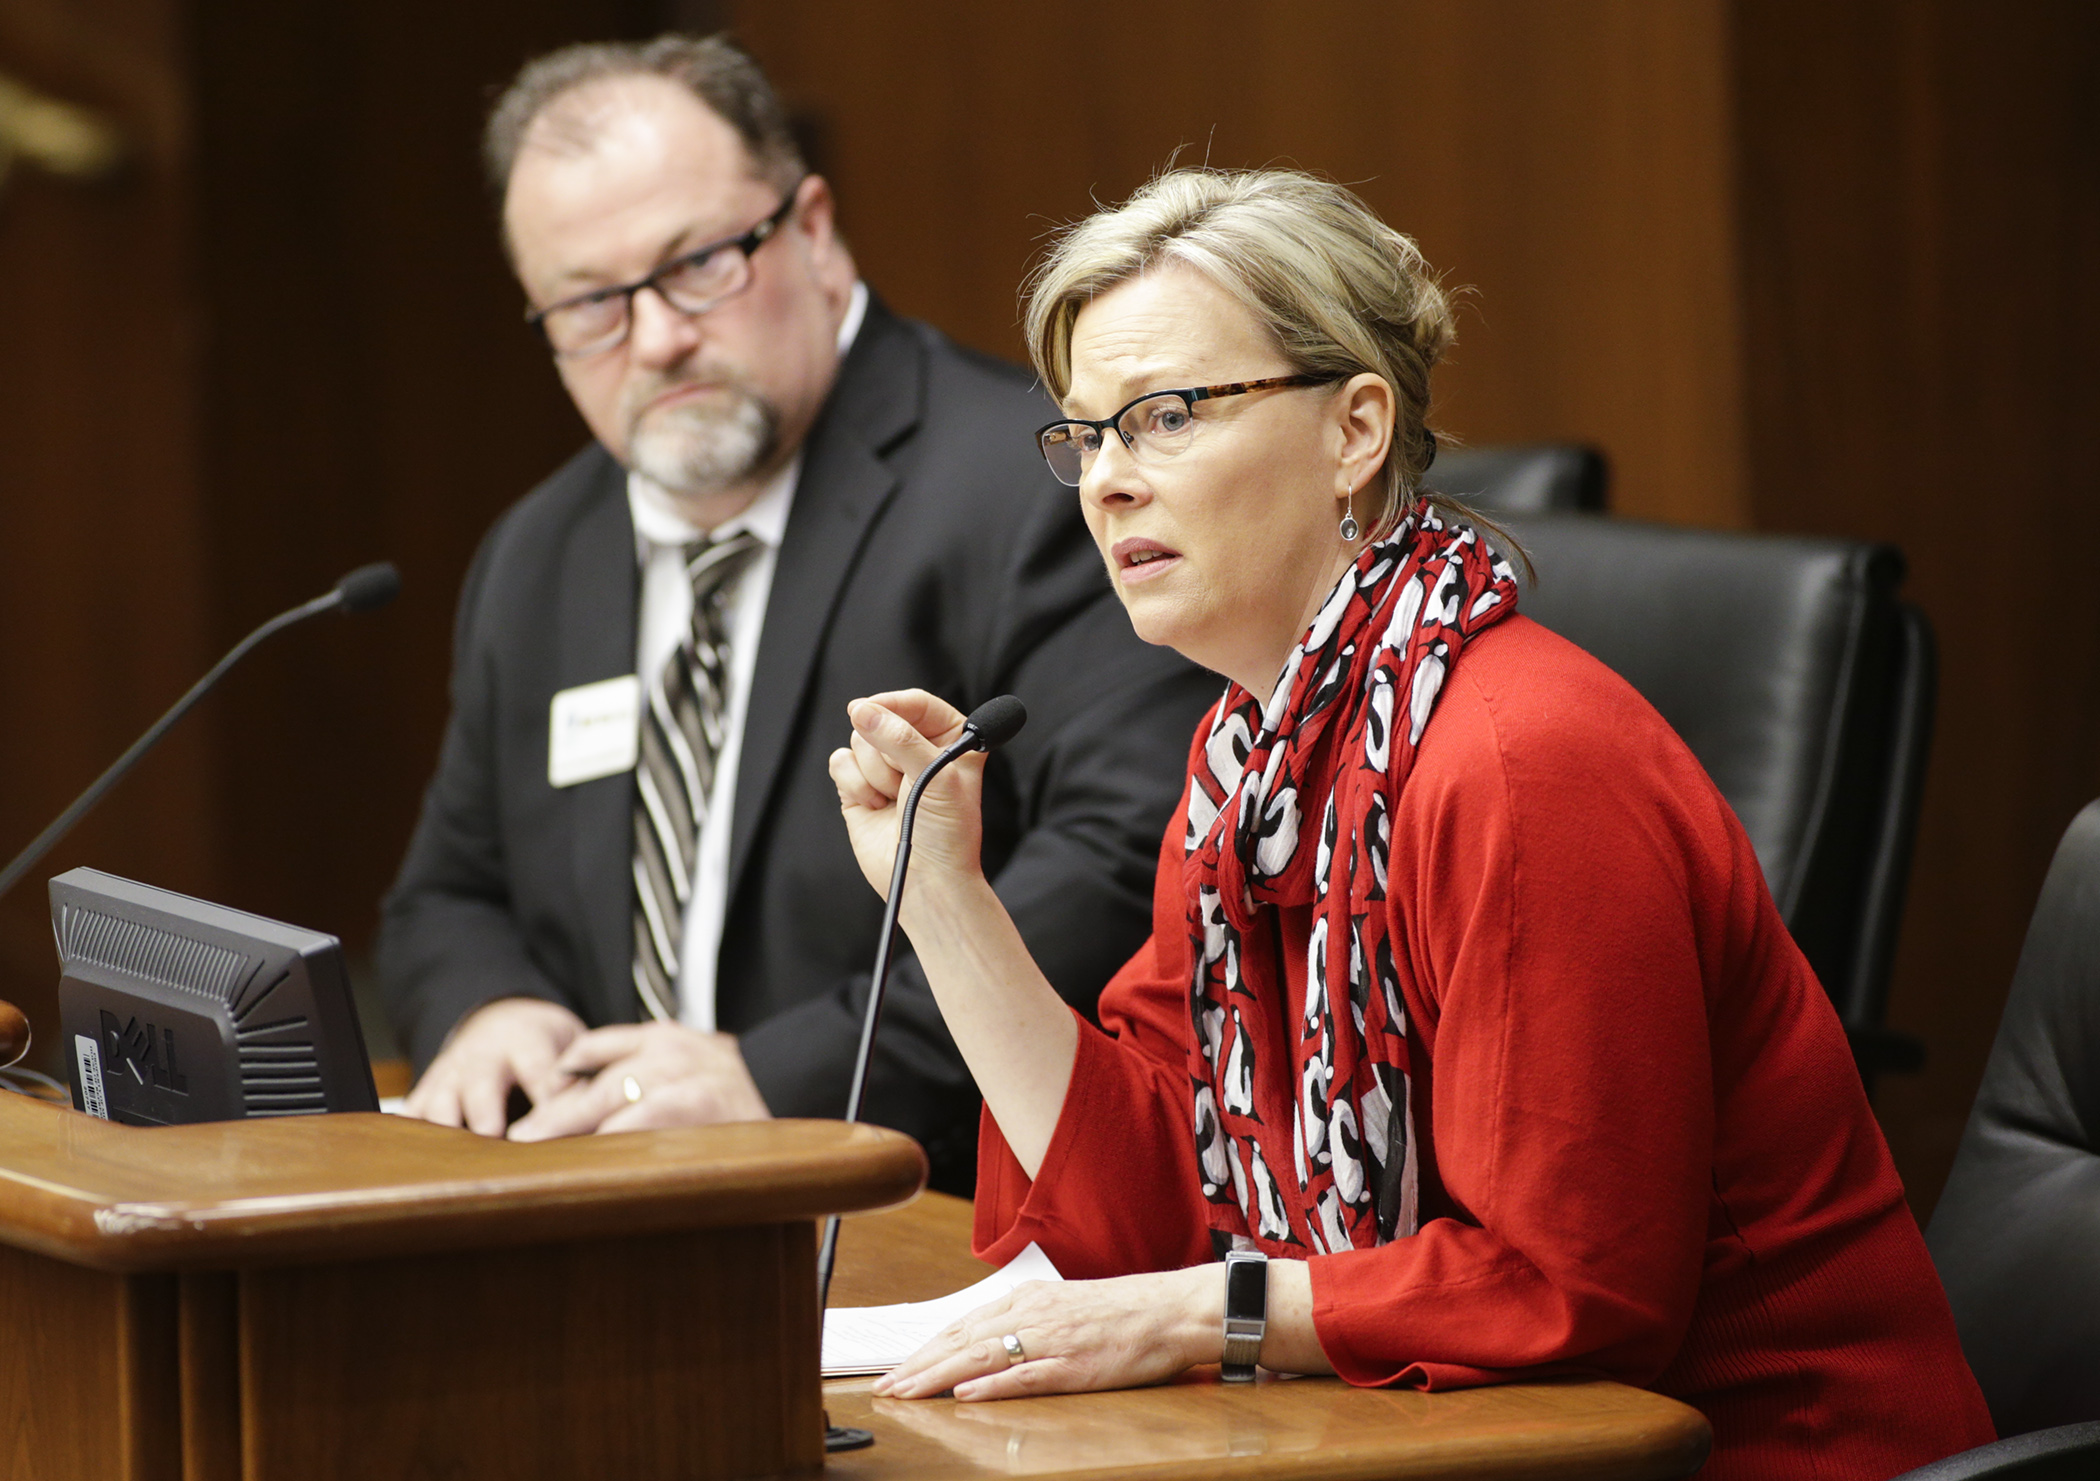 Rep. Julie Sandstede makes closing comments during testimony in the House Education Finance Division on HF882, a bill she sponsors that would, in part, make changes to the general education basic funding formula. Photo by Paul Battaglia